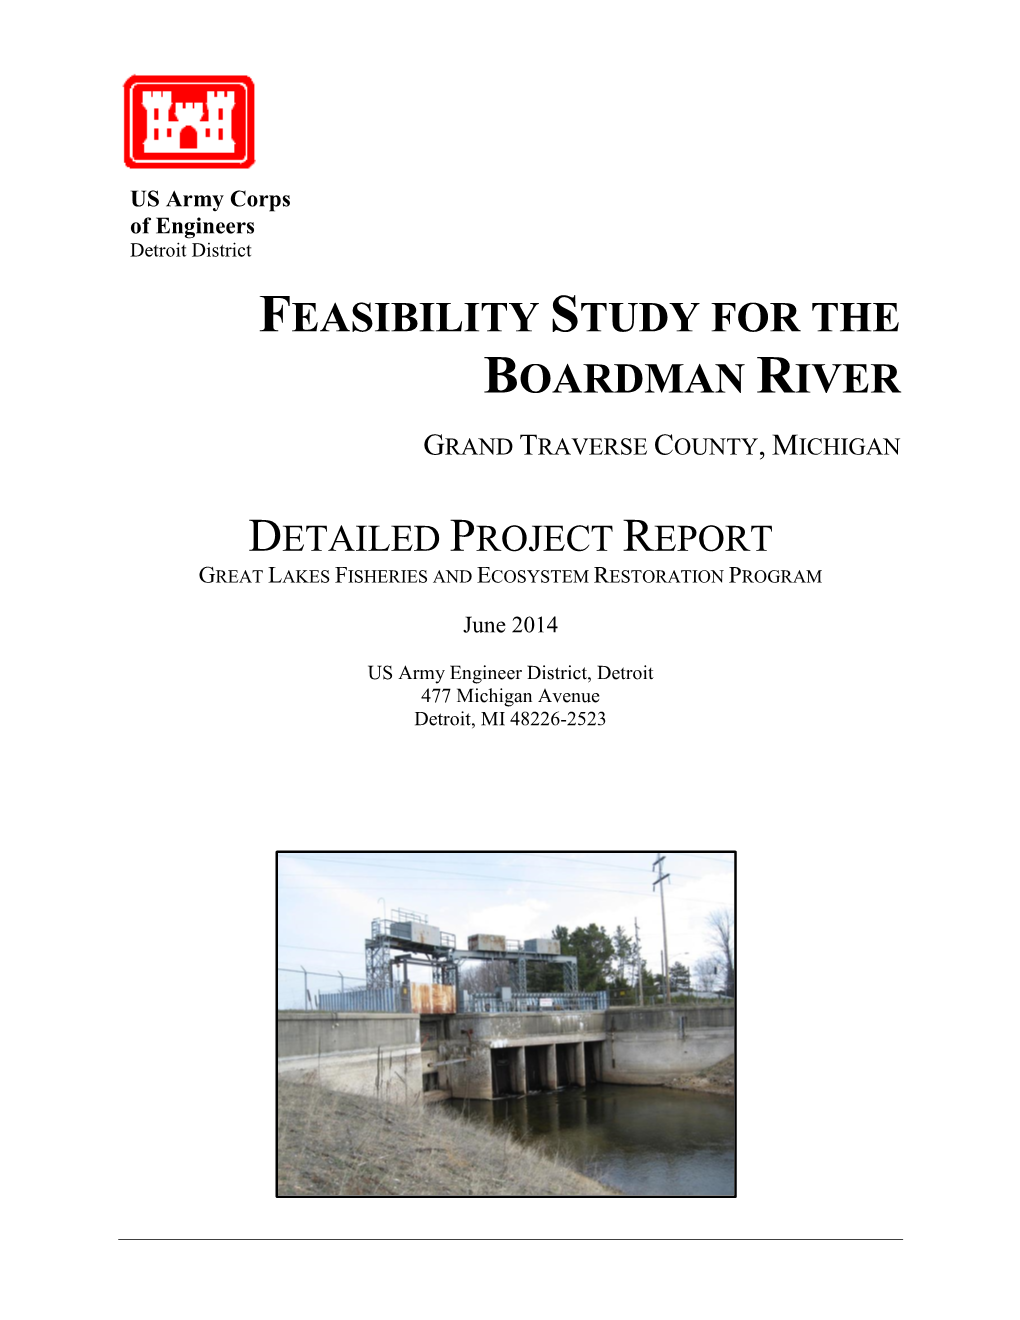 Feasibility Study for the Boardman River